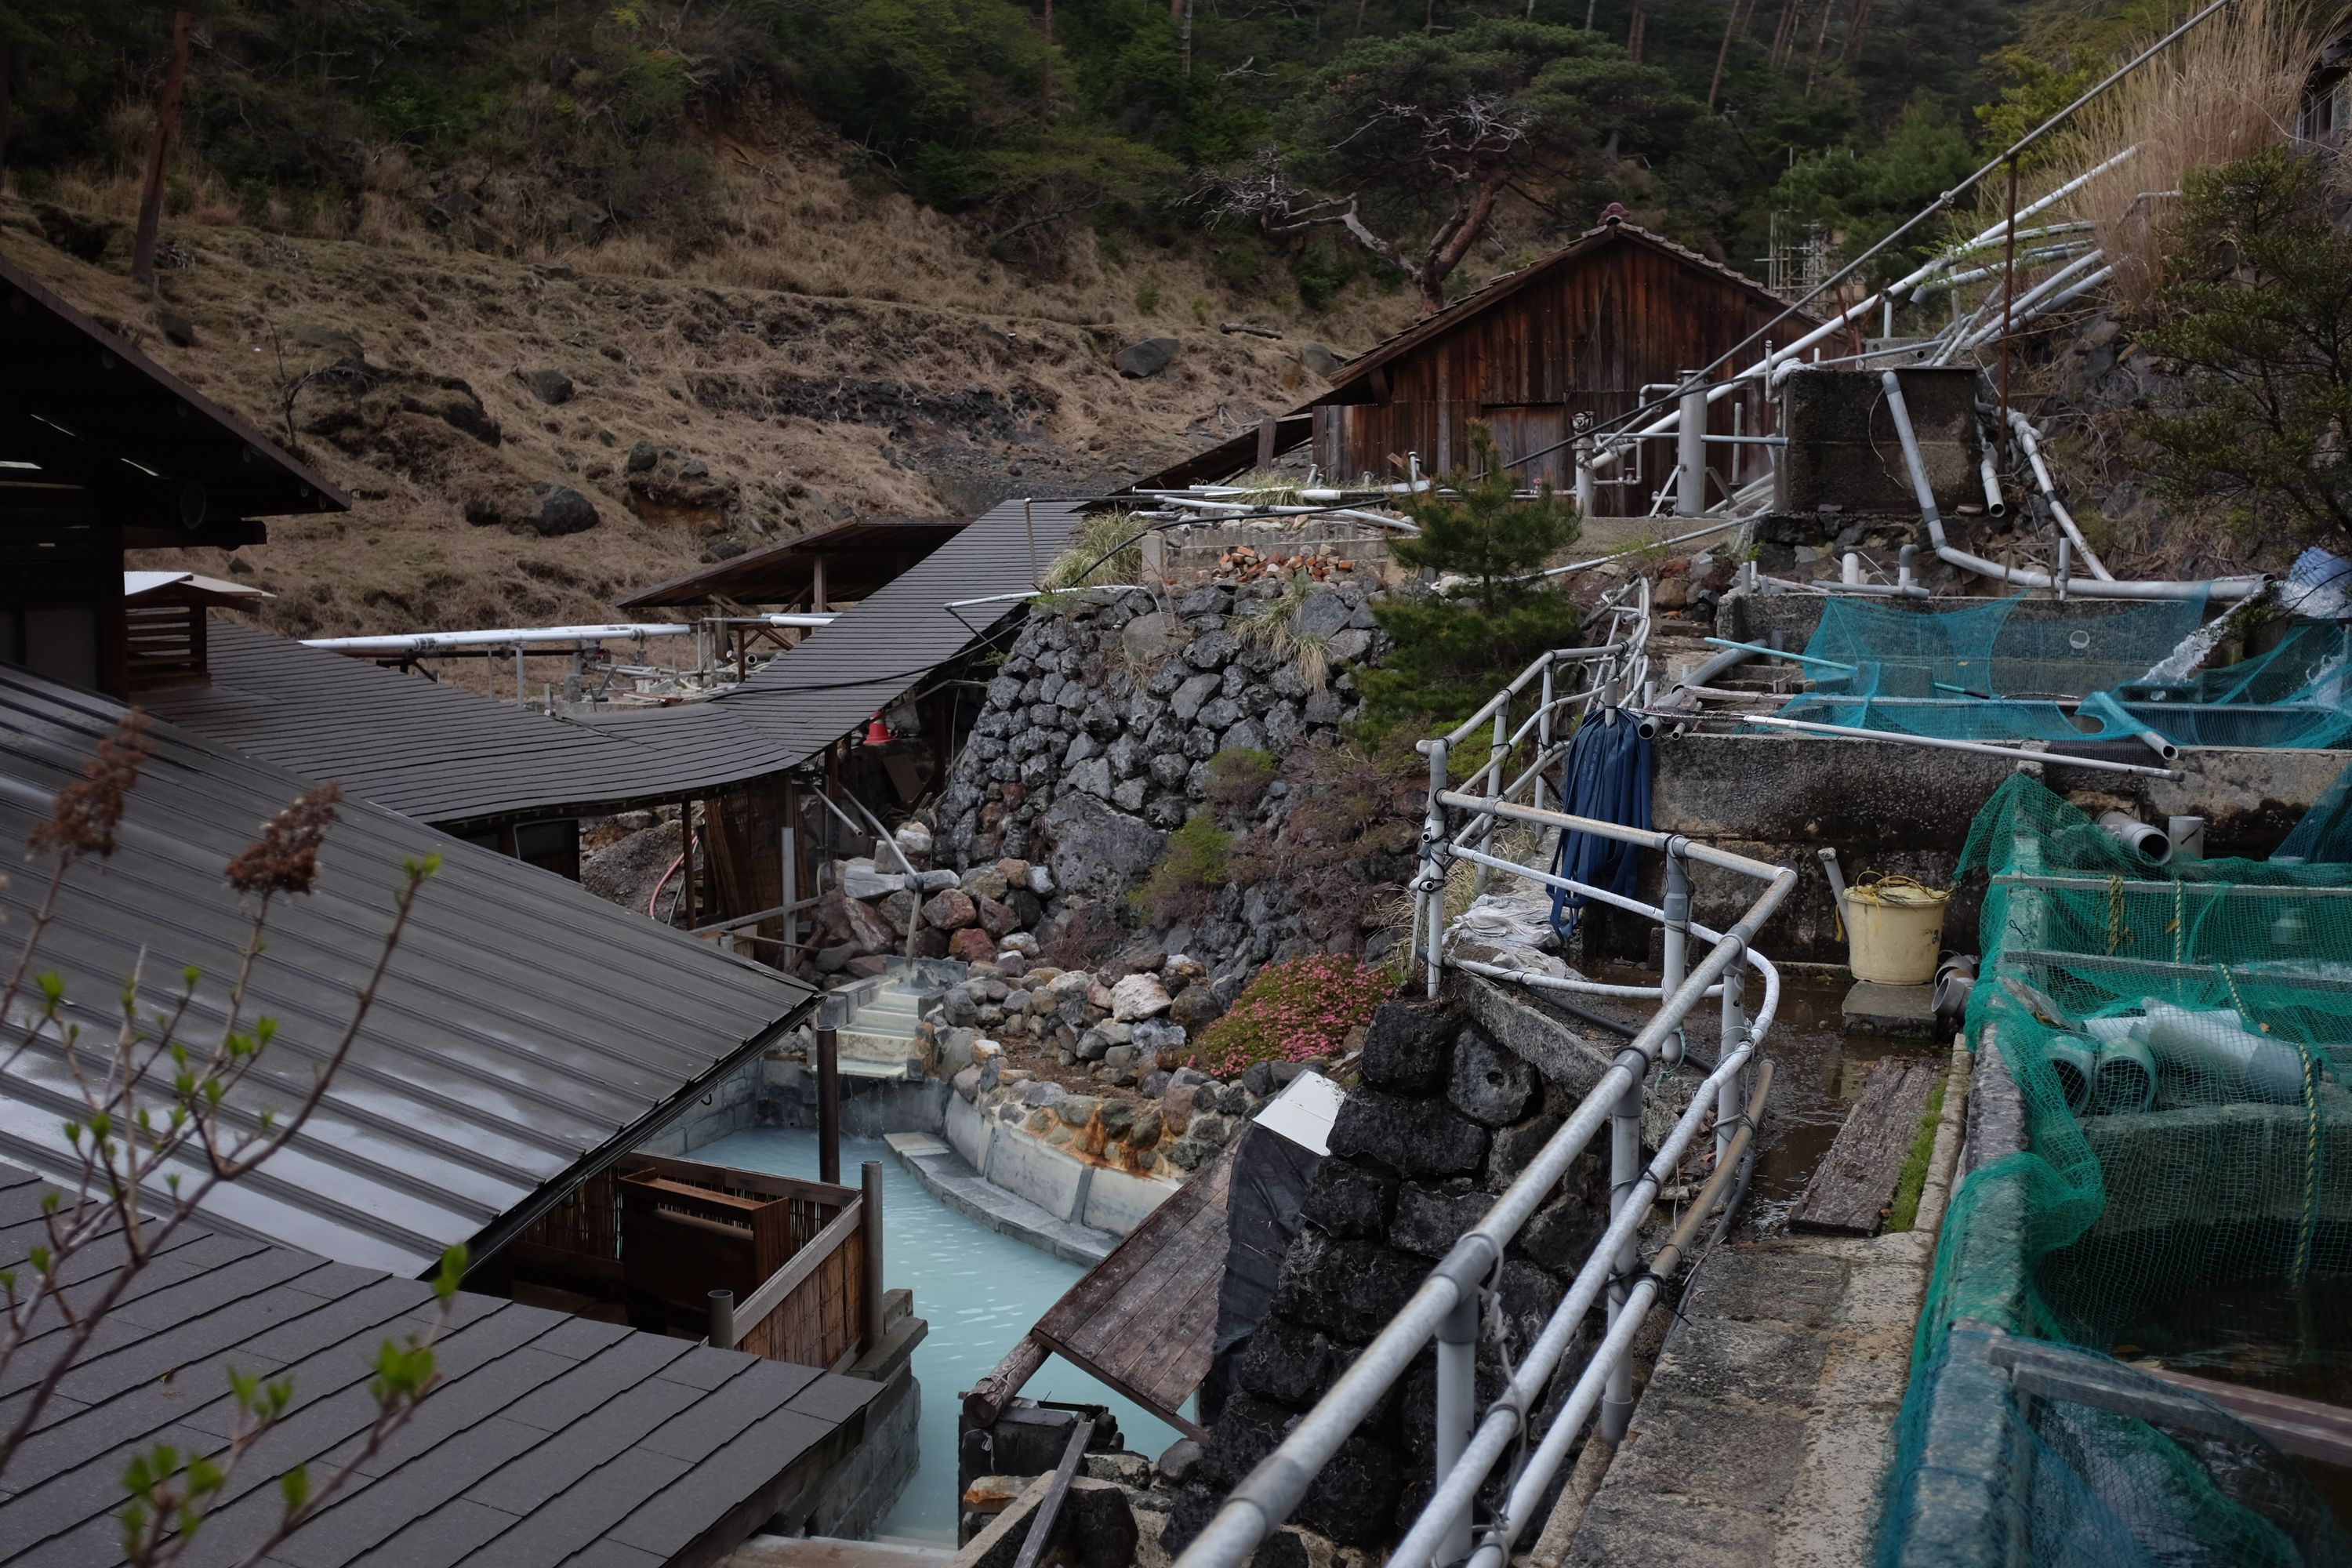 The very chaotic-looking buildings of a public bath in the mountains.